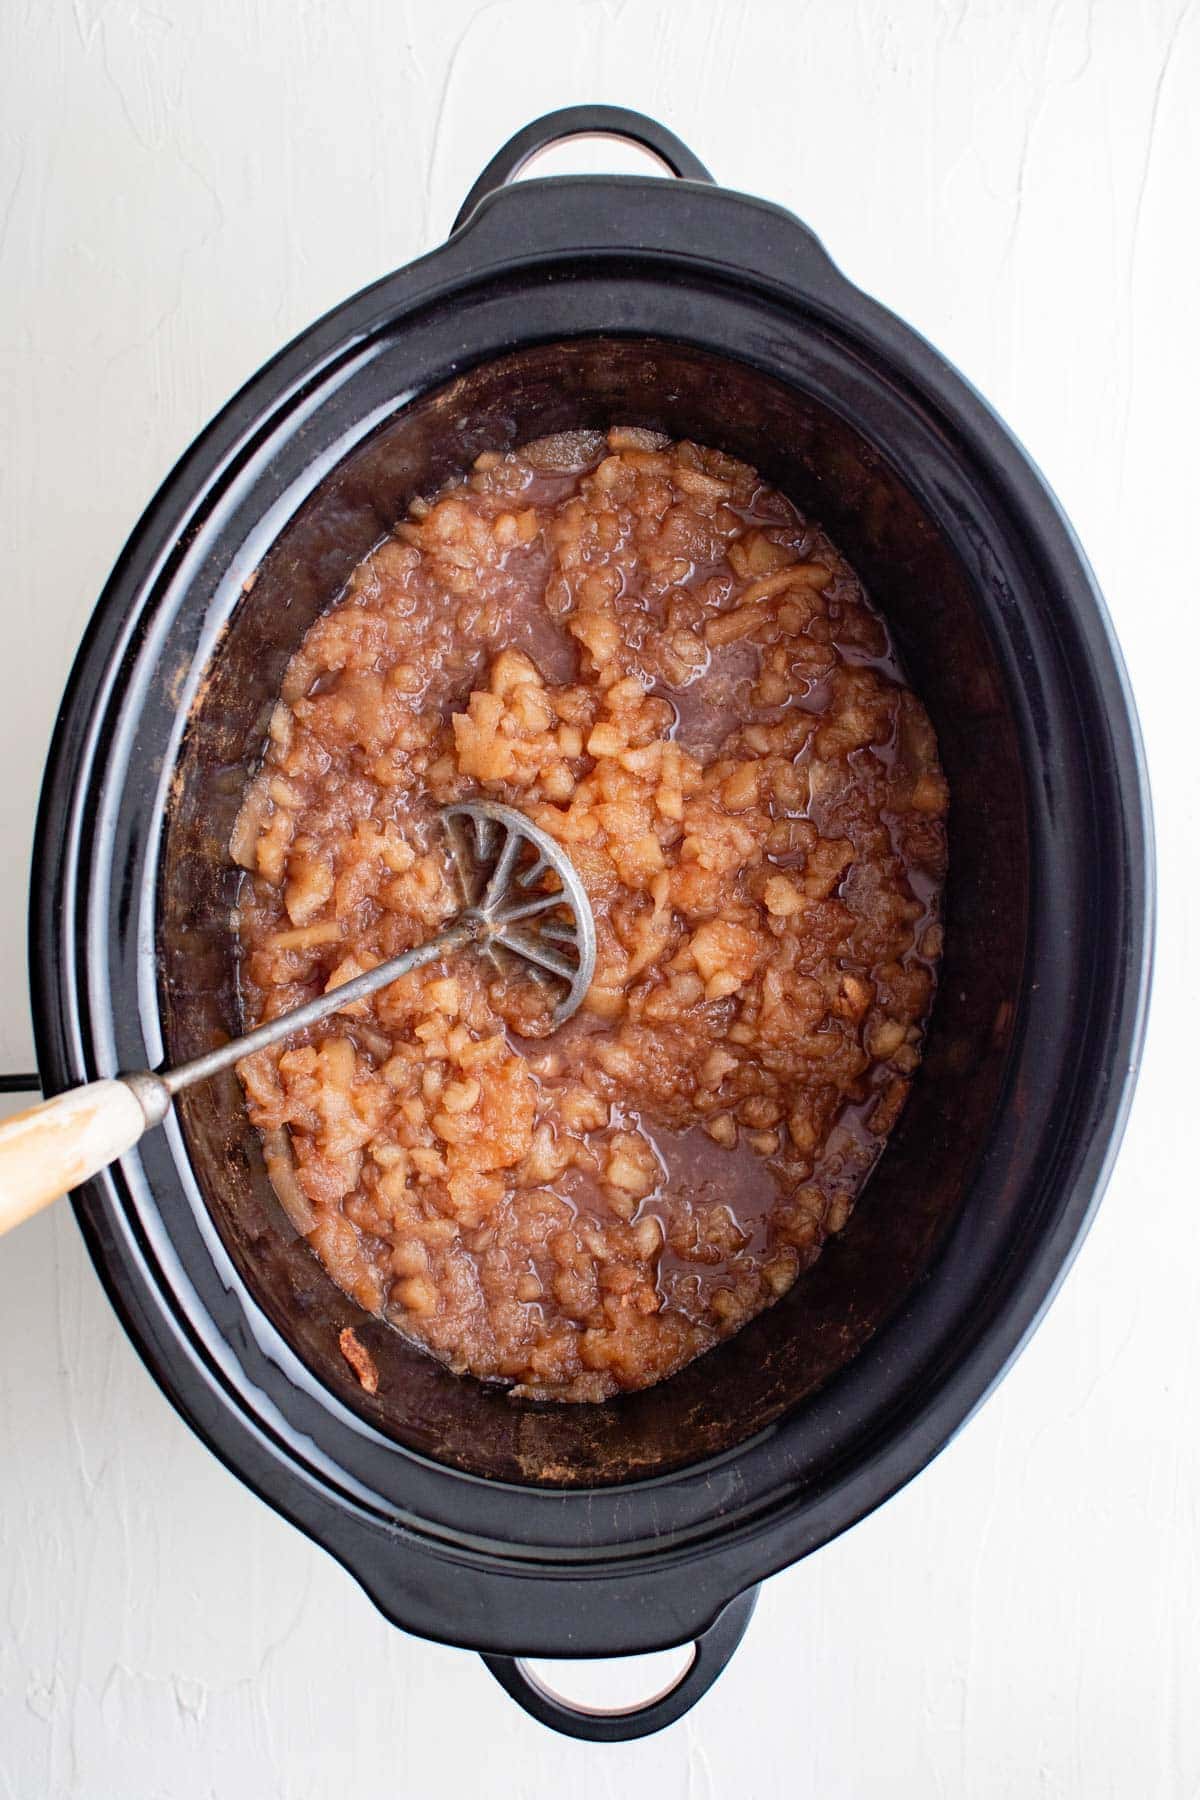 masher and applesauce in slow cooker